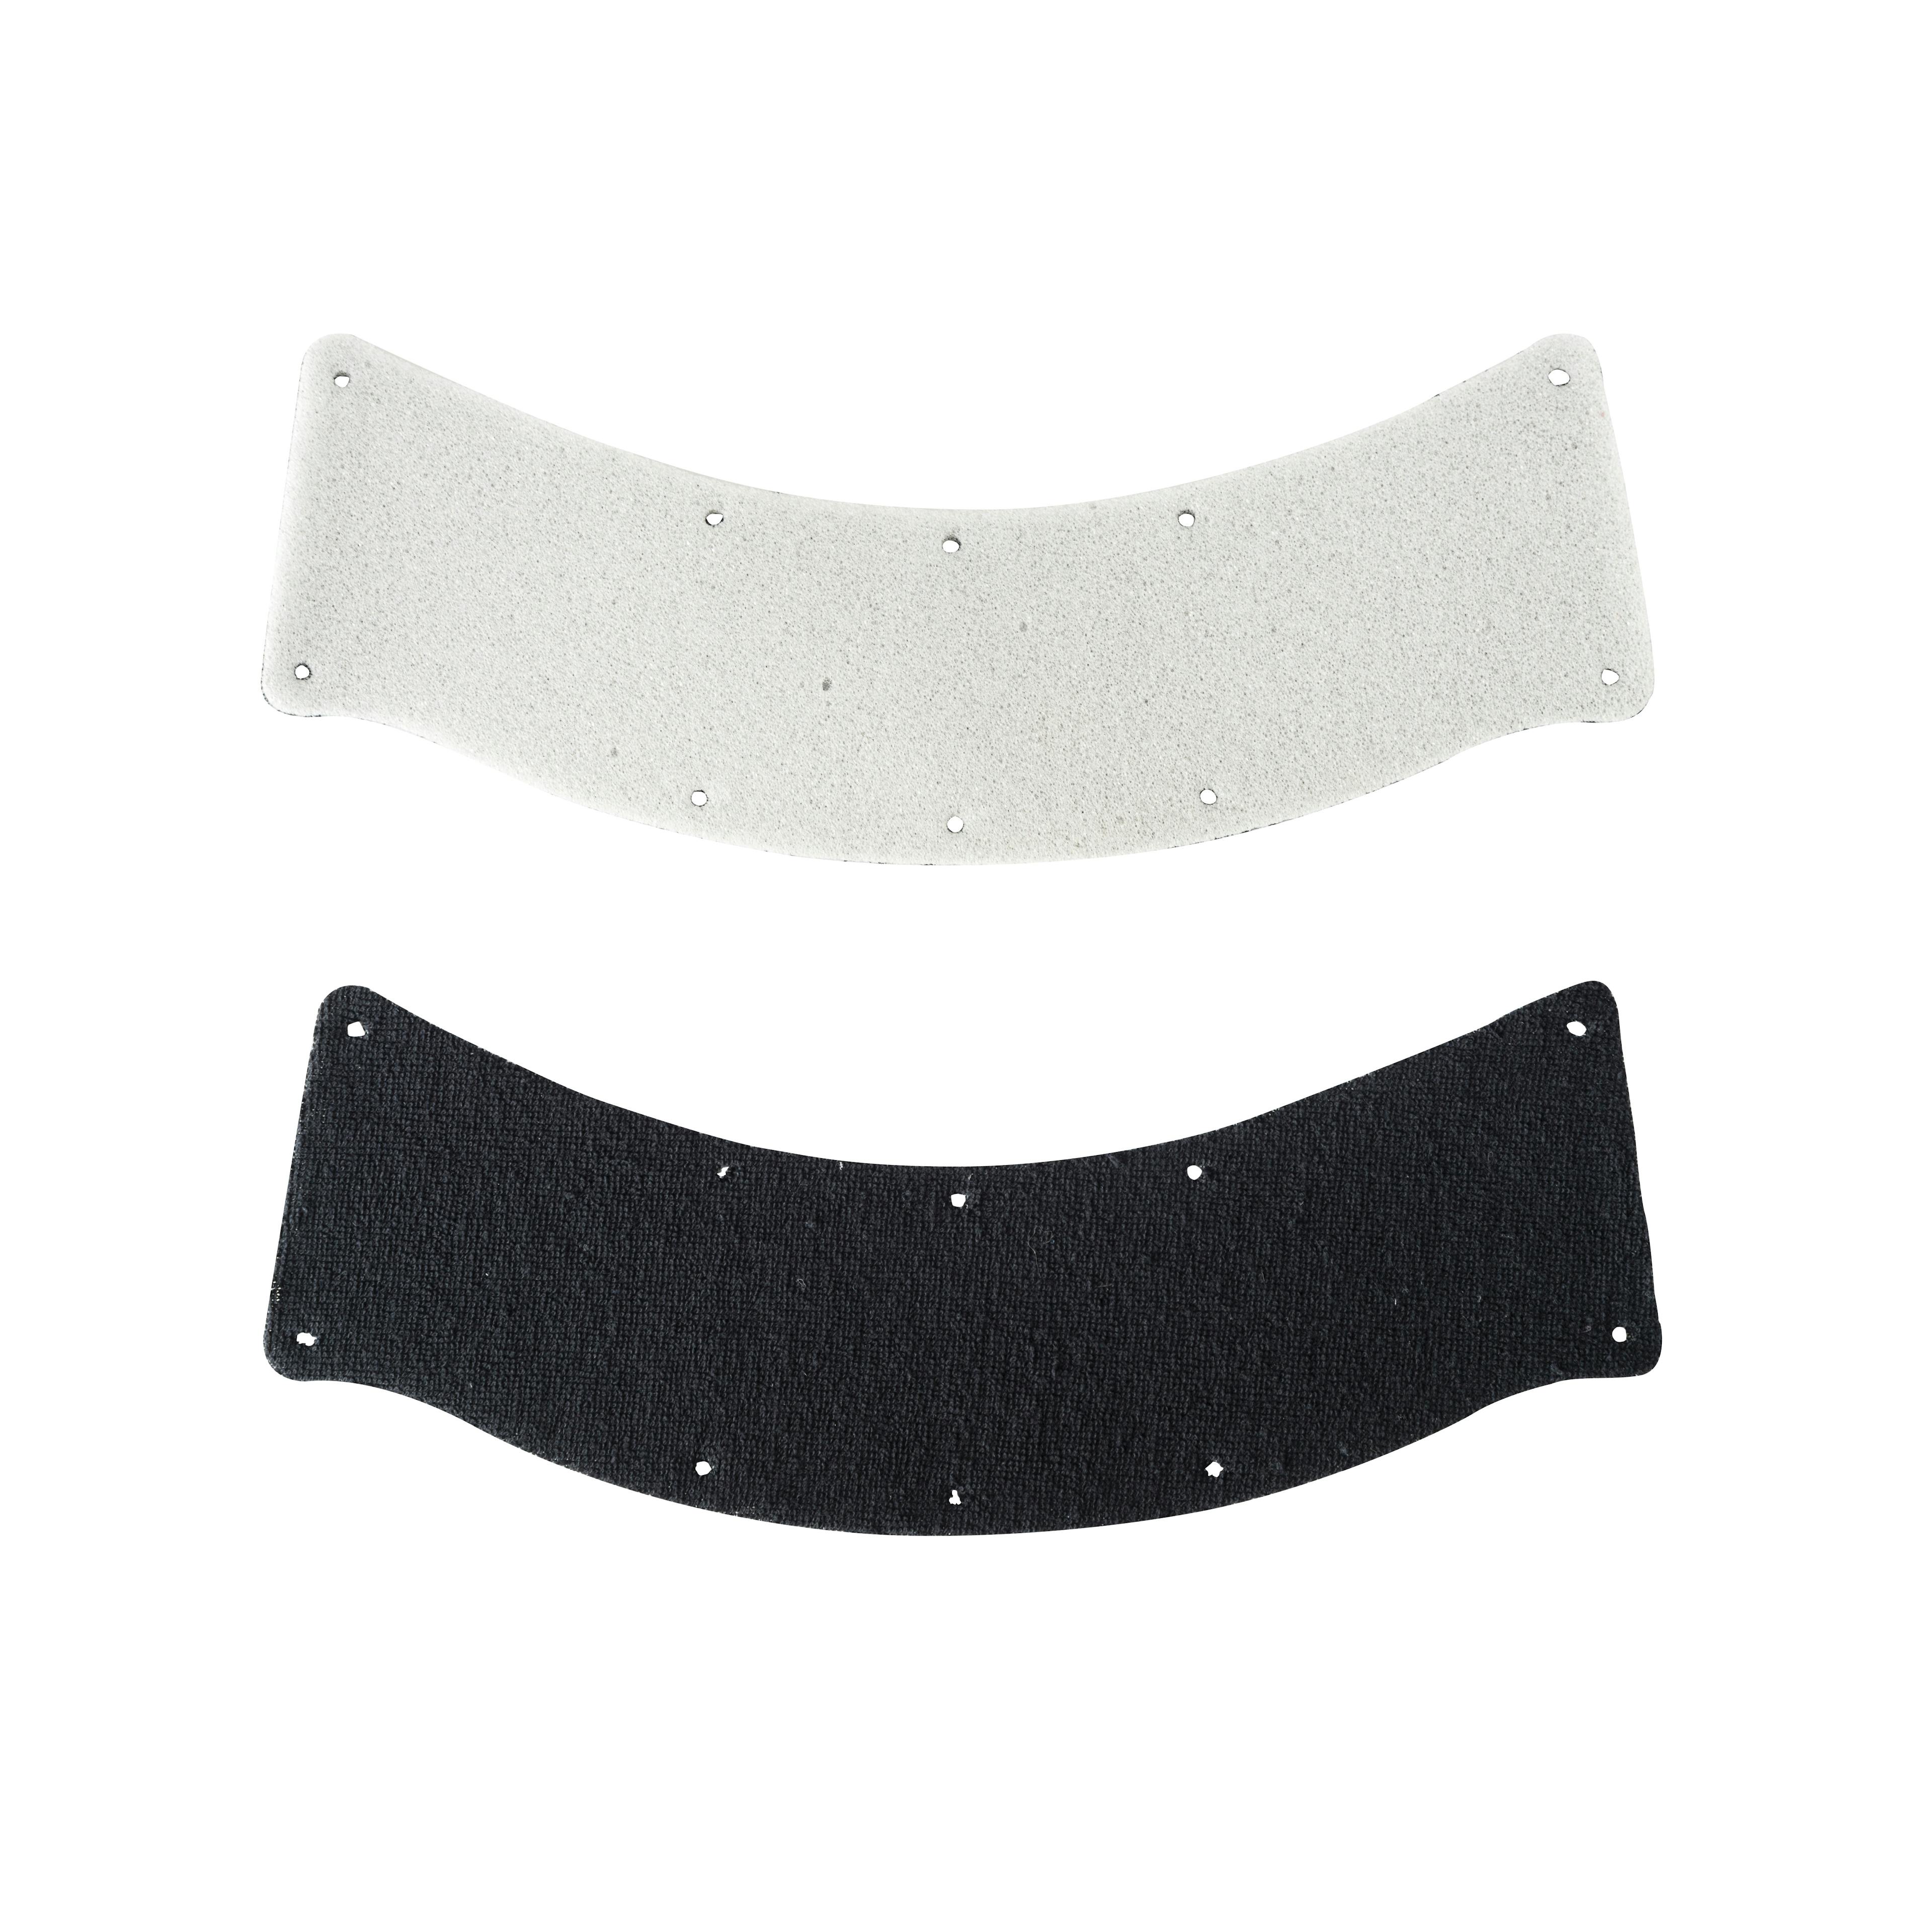 Force360 Aegis  Replacement Sweatband (10 Pack)